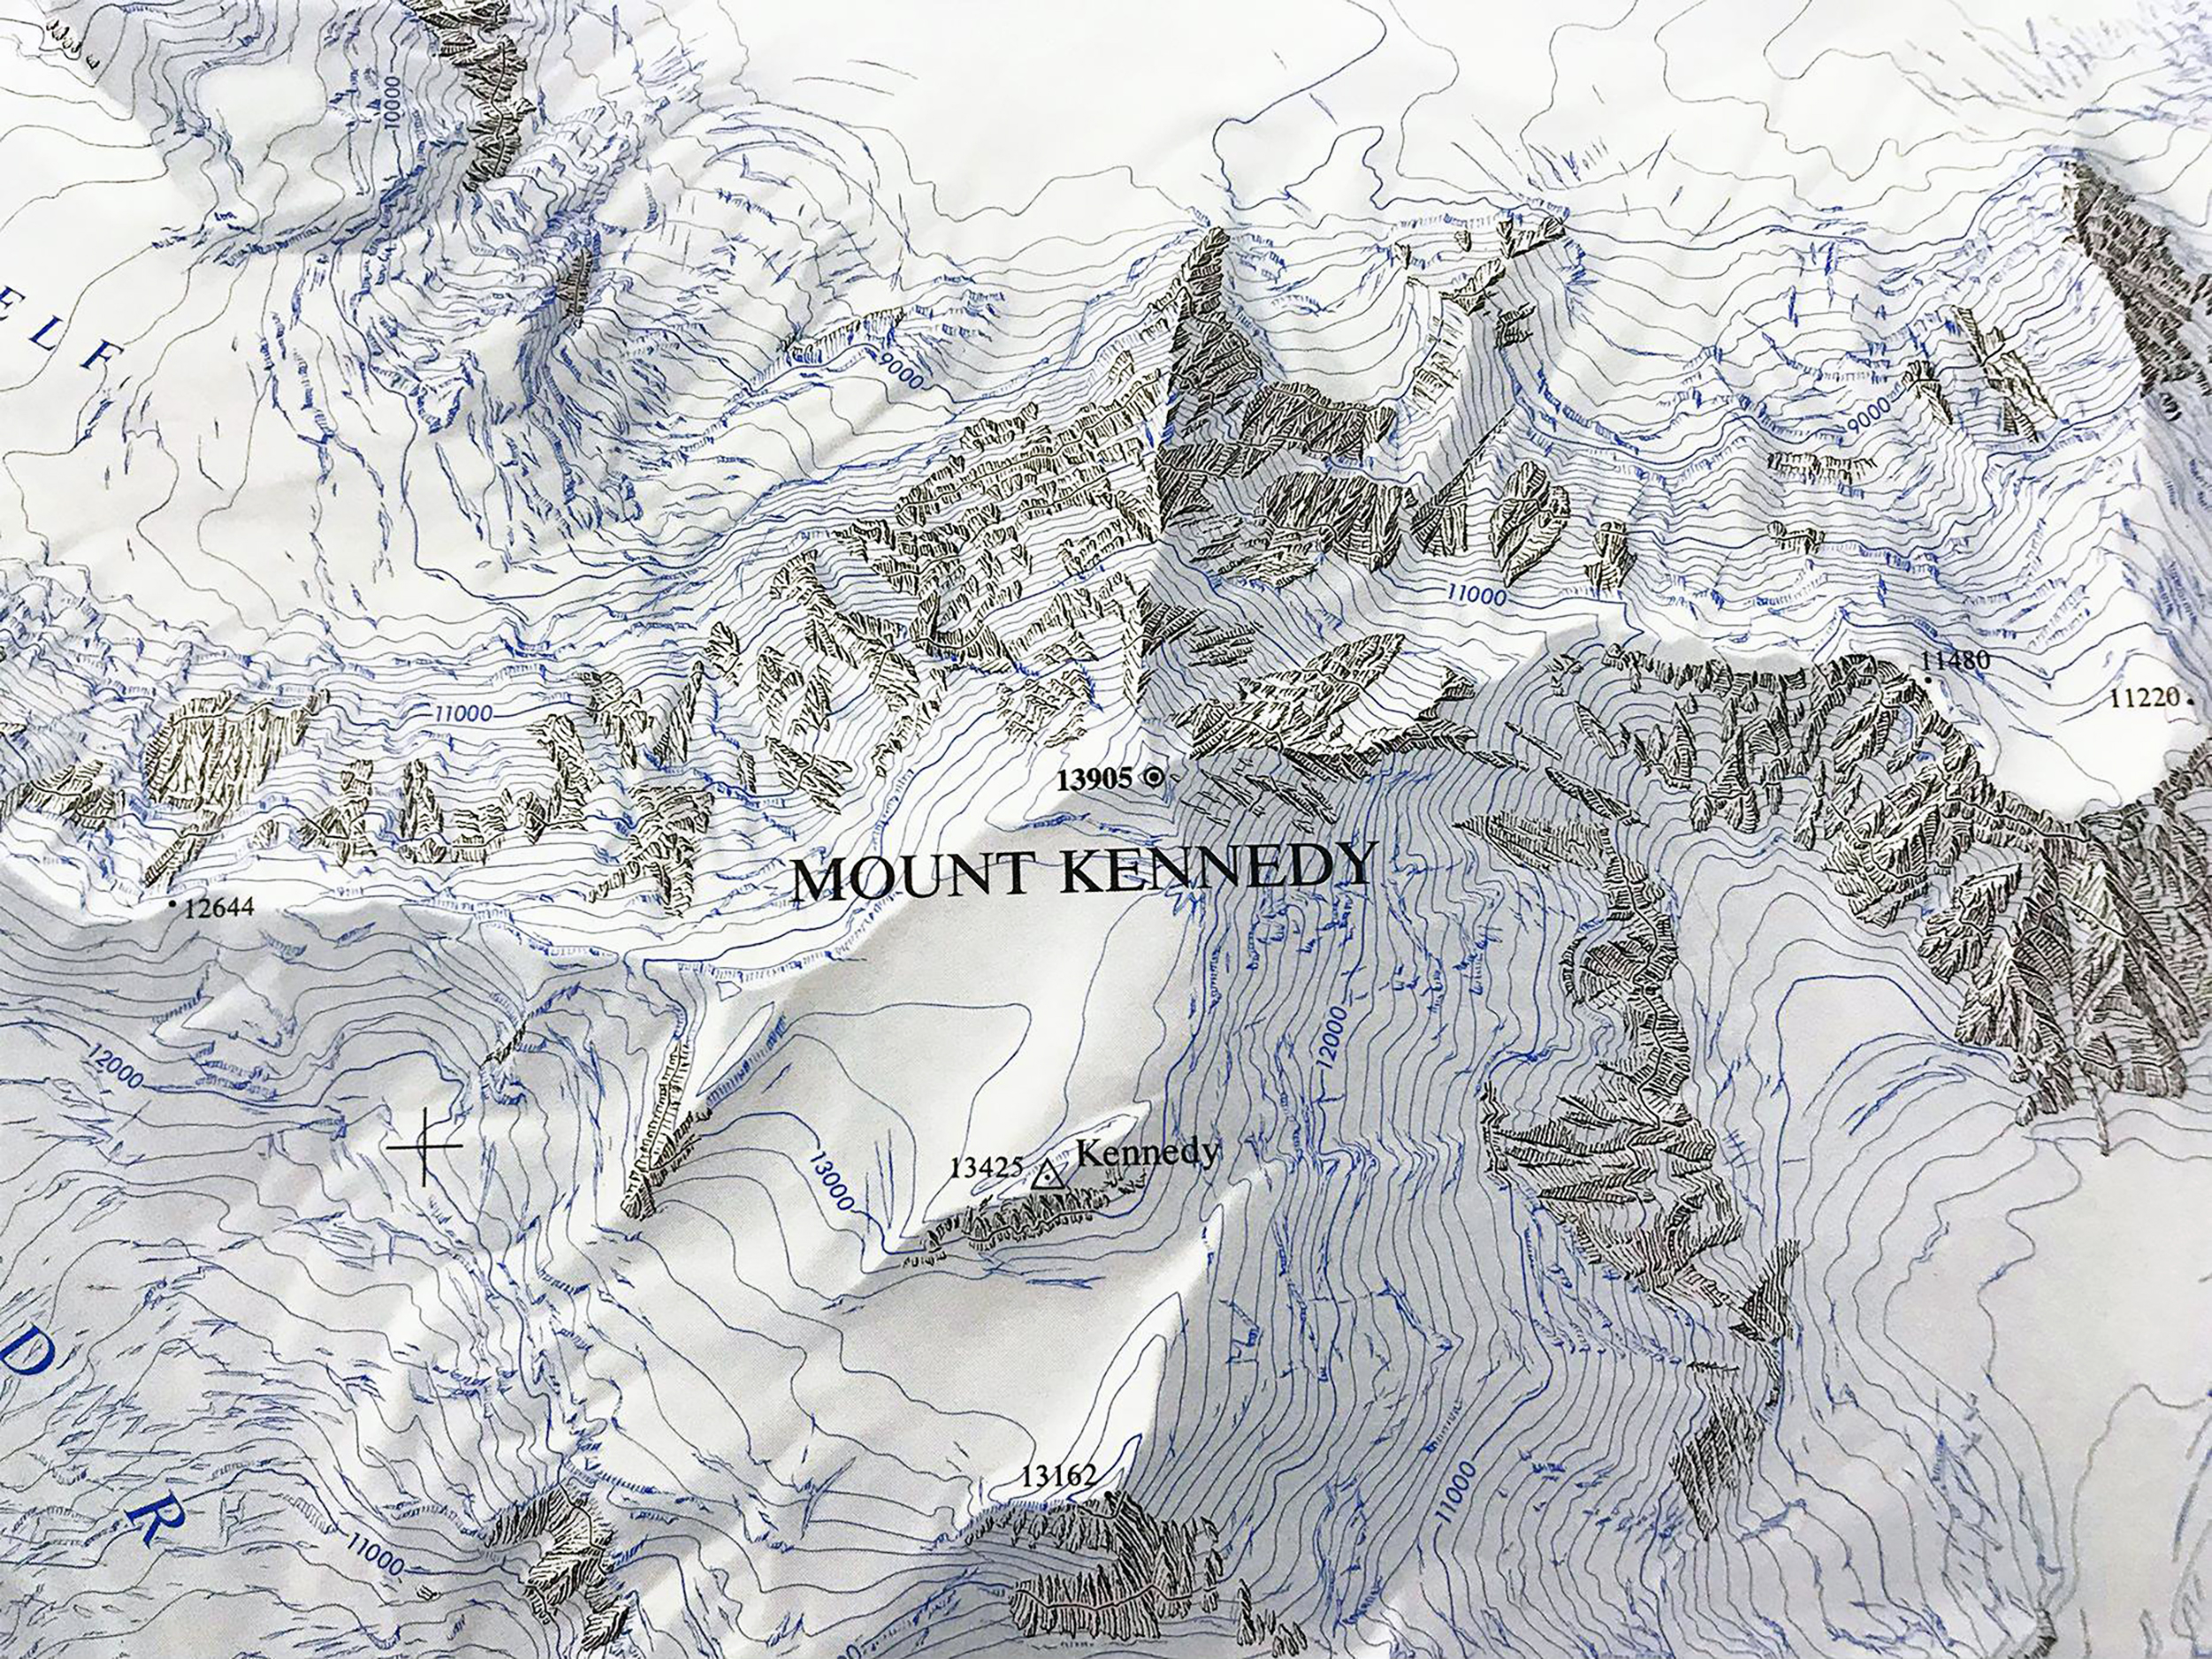 The Massif of Mt. Hubbard, Mt. Alverstone, and Mt. Kennedy